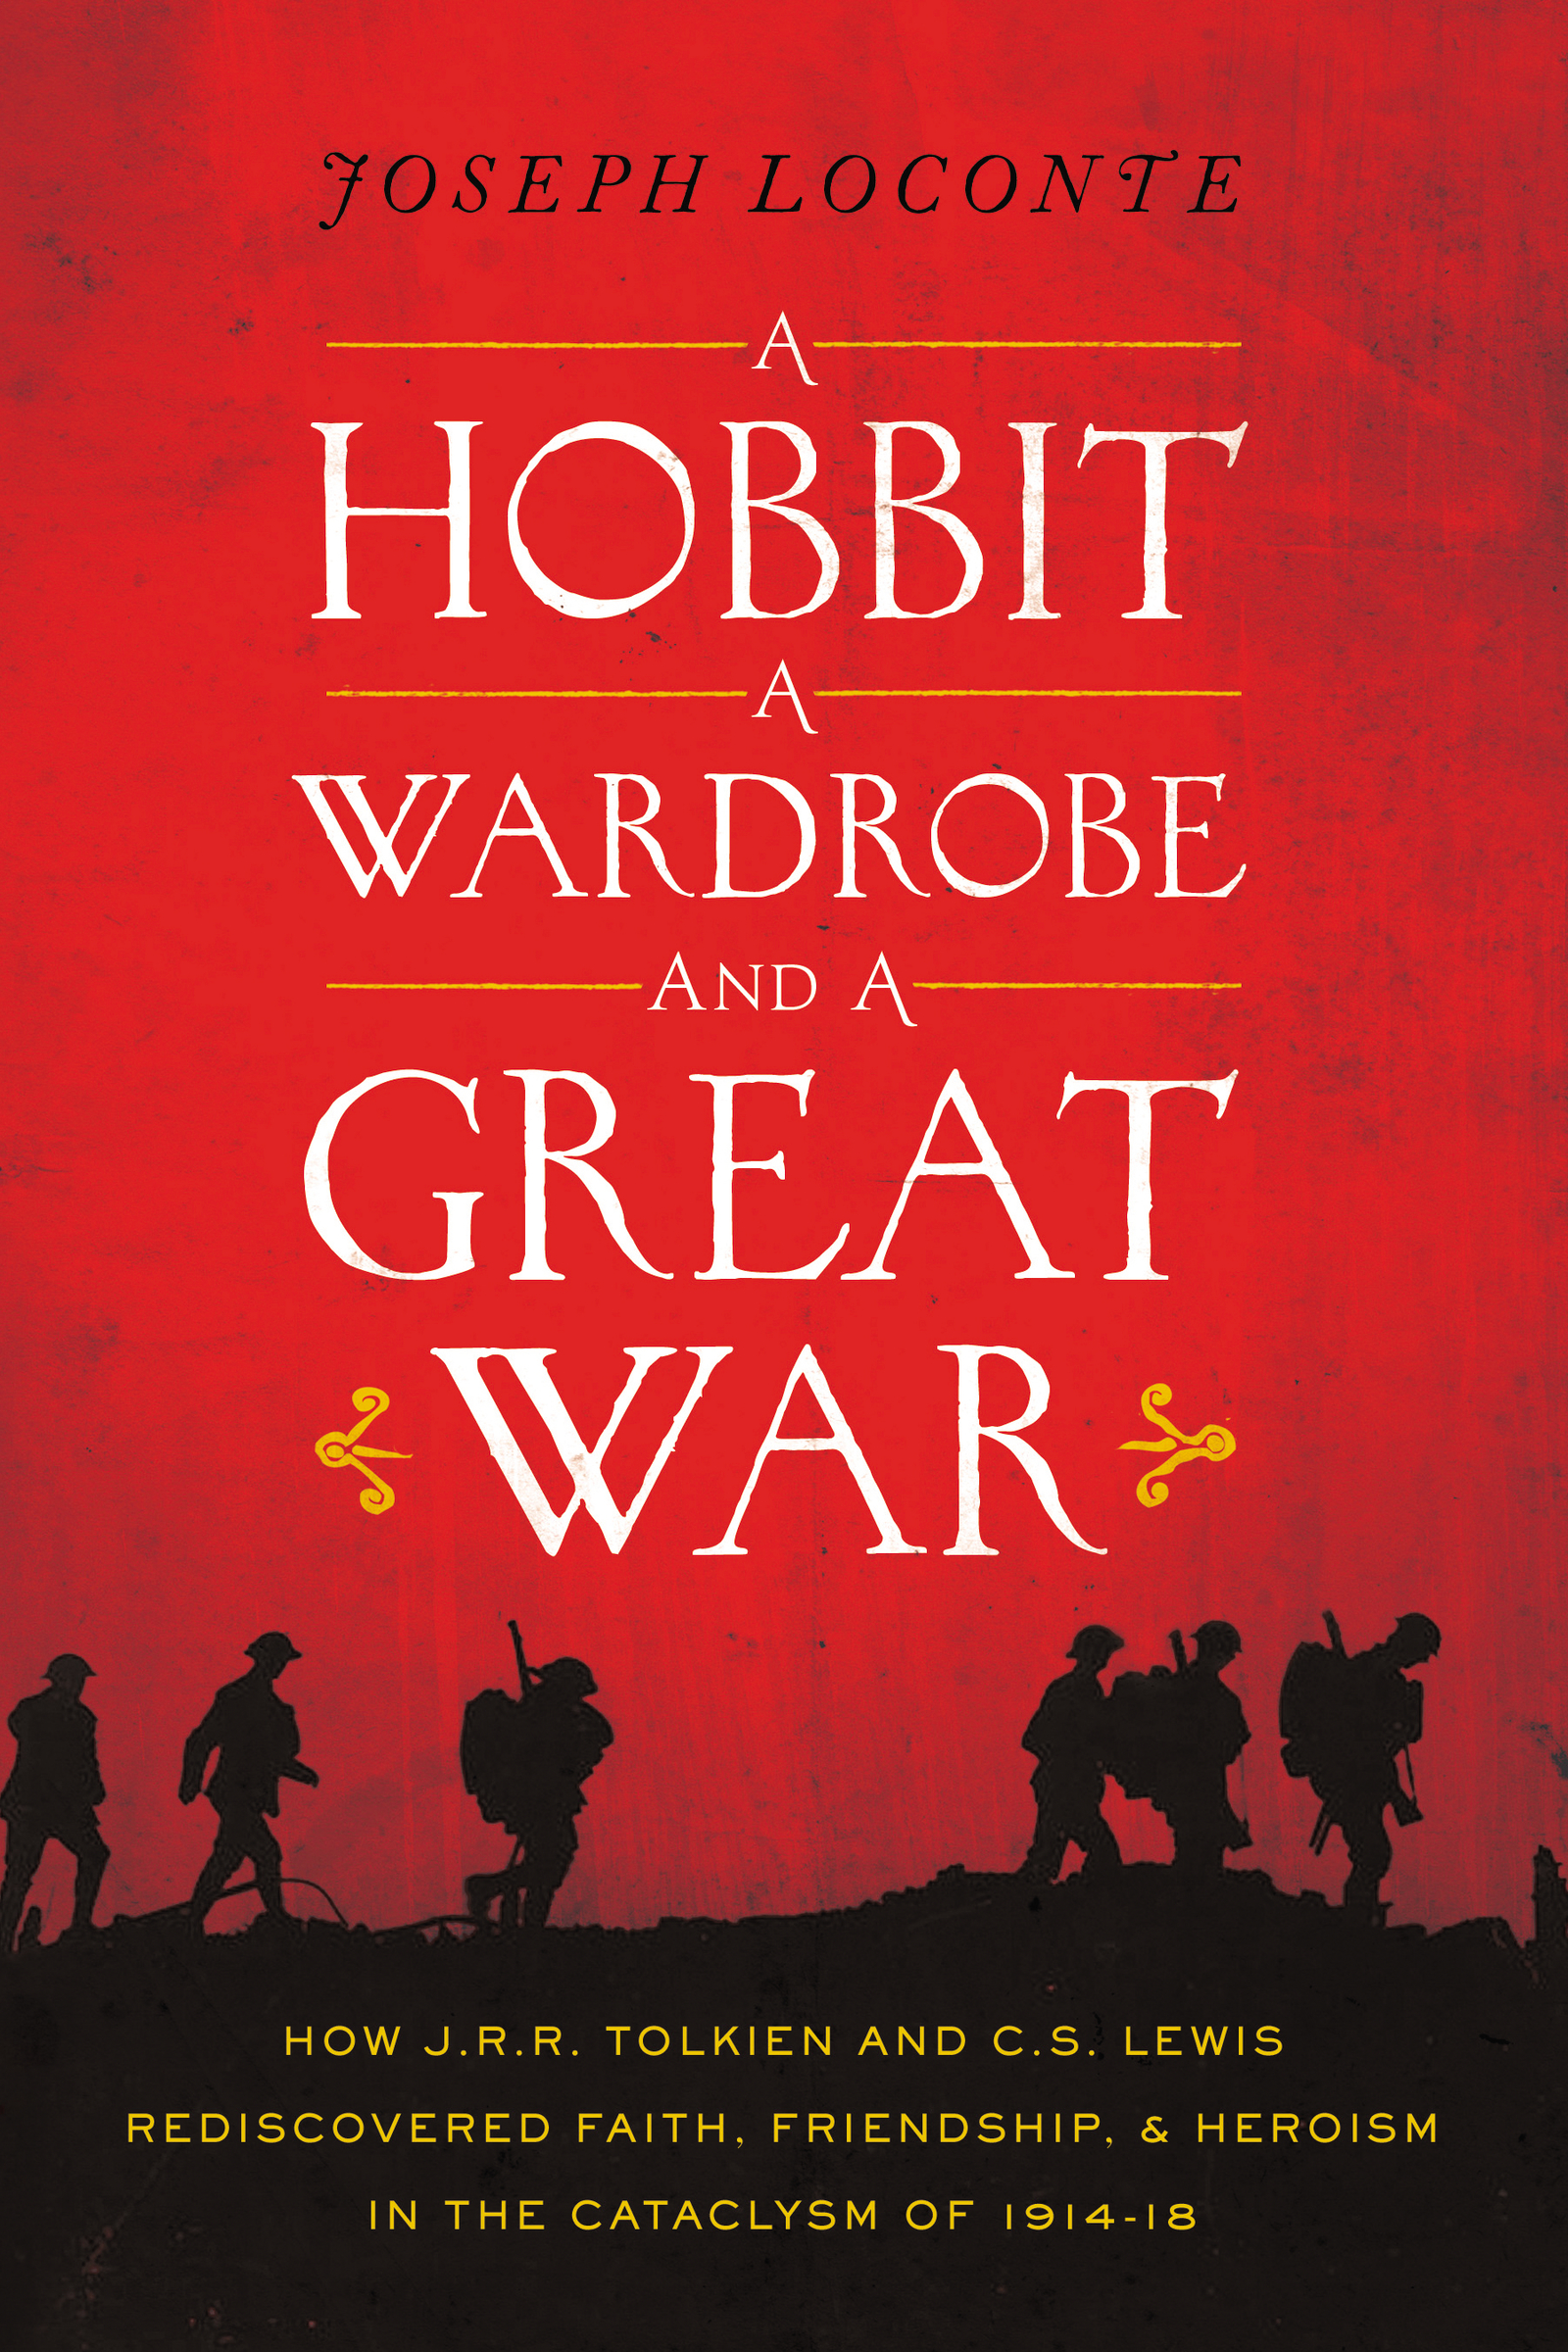 A Hobbit, a Wardrobe, and a Great War How J.R.R. Tolkien and C.S. Lewis Rediscovered Faith, Friendship, and Heroism in the Cataclysm of 1914-18 cover image